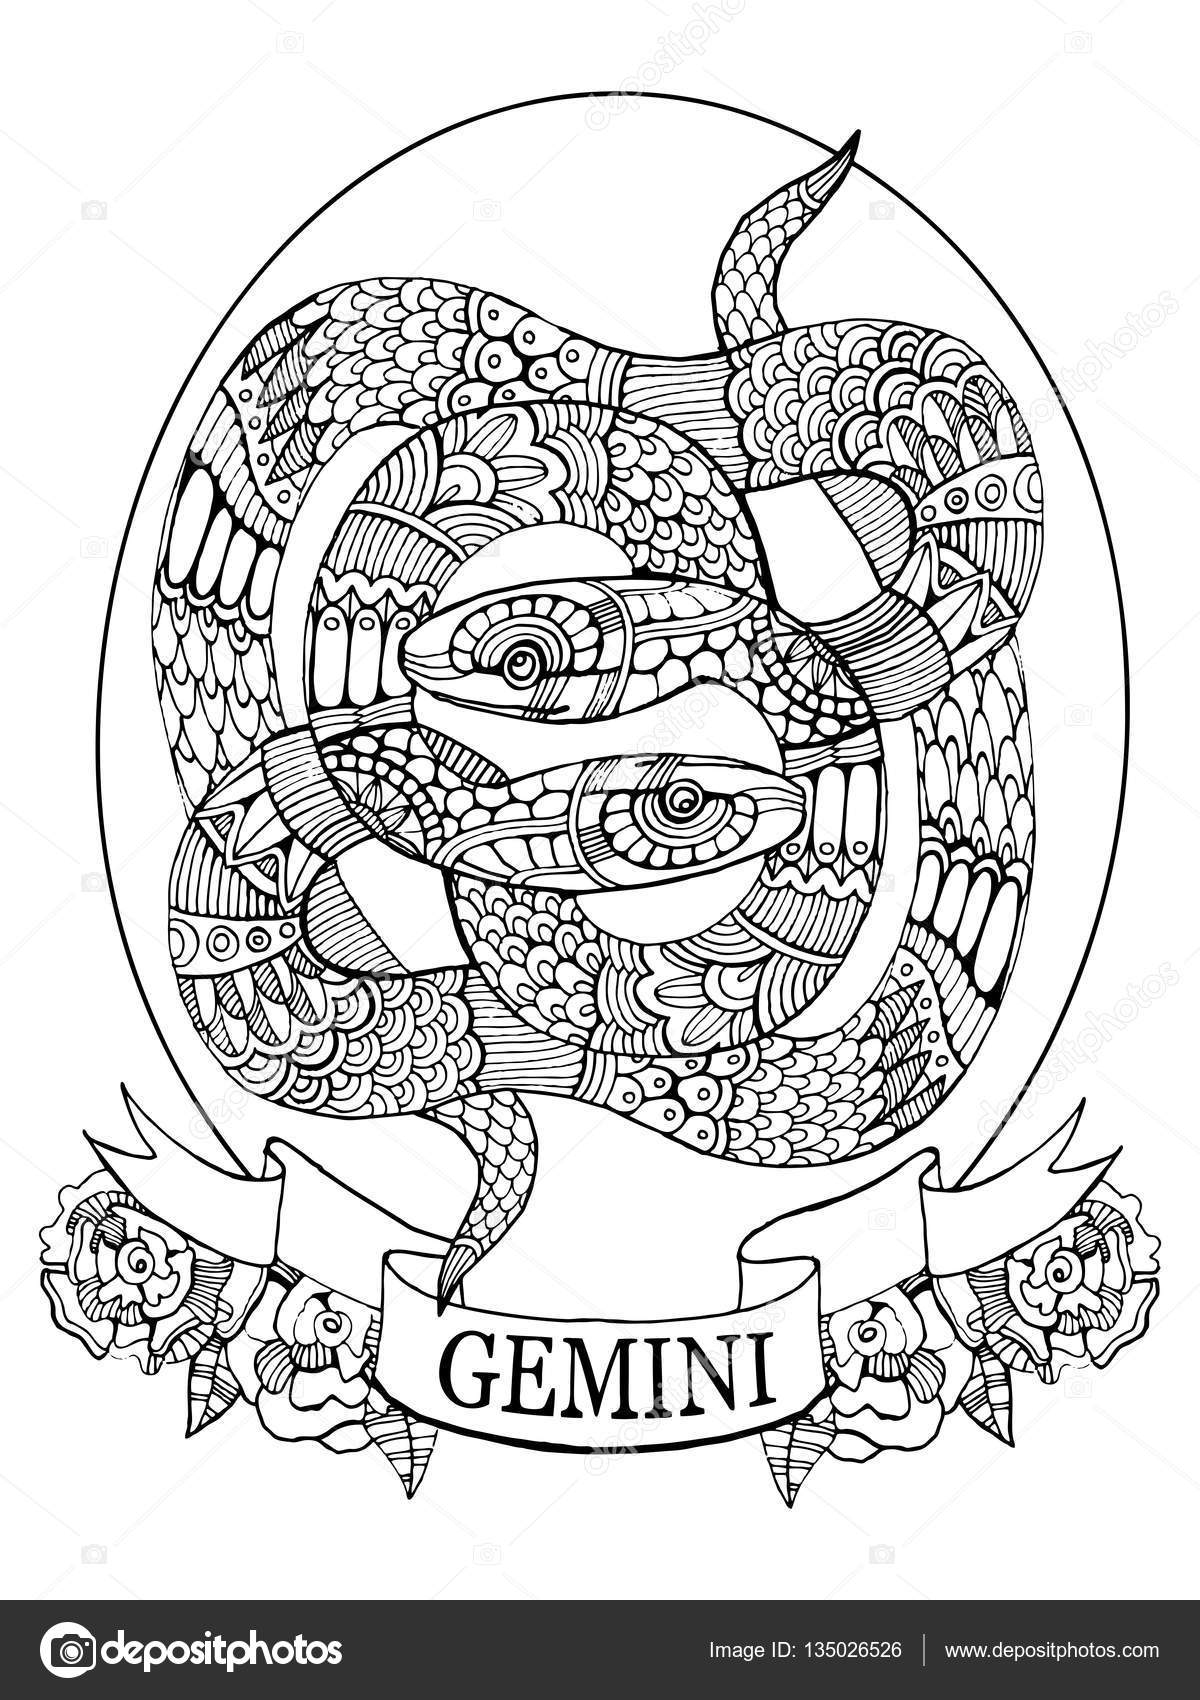 Download Gemini zodiac sign coloring book for adults vector — Stock Vector © AlexanderPokusay #135026526